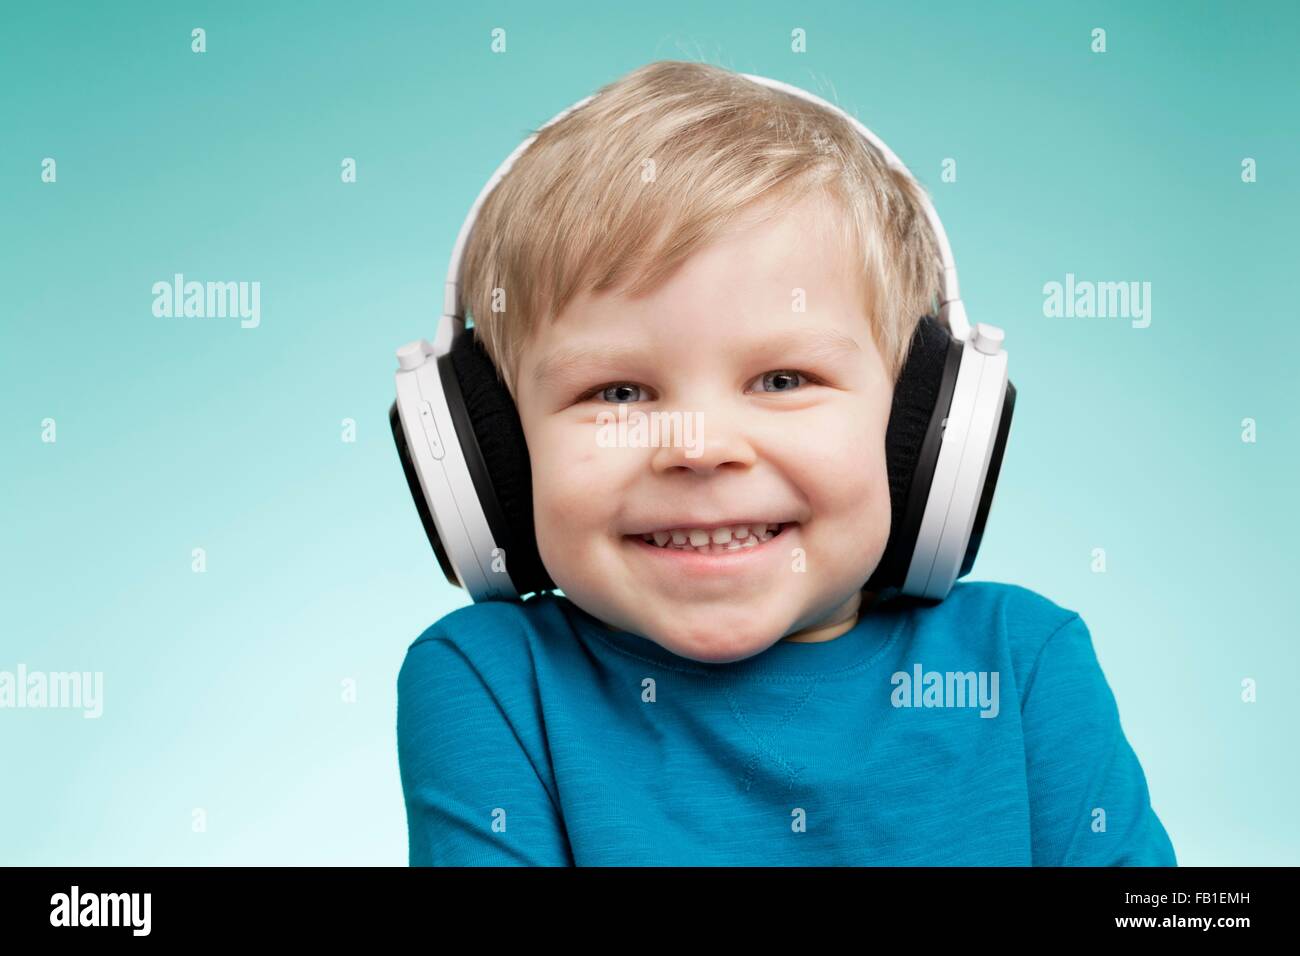 Little boy wearing headphones and smiling Stock Photo